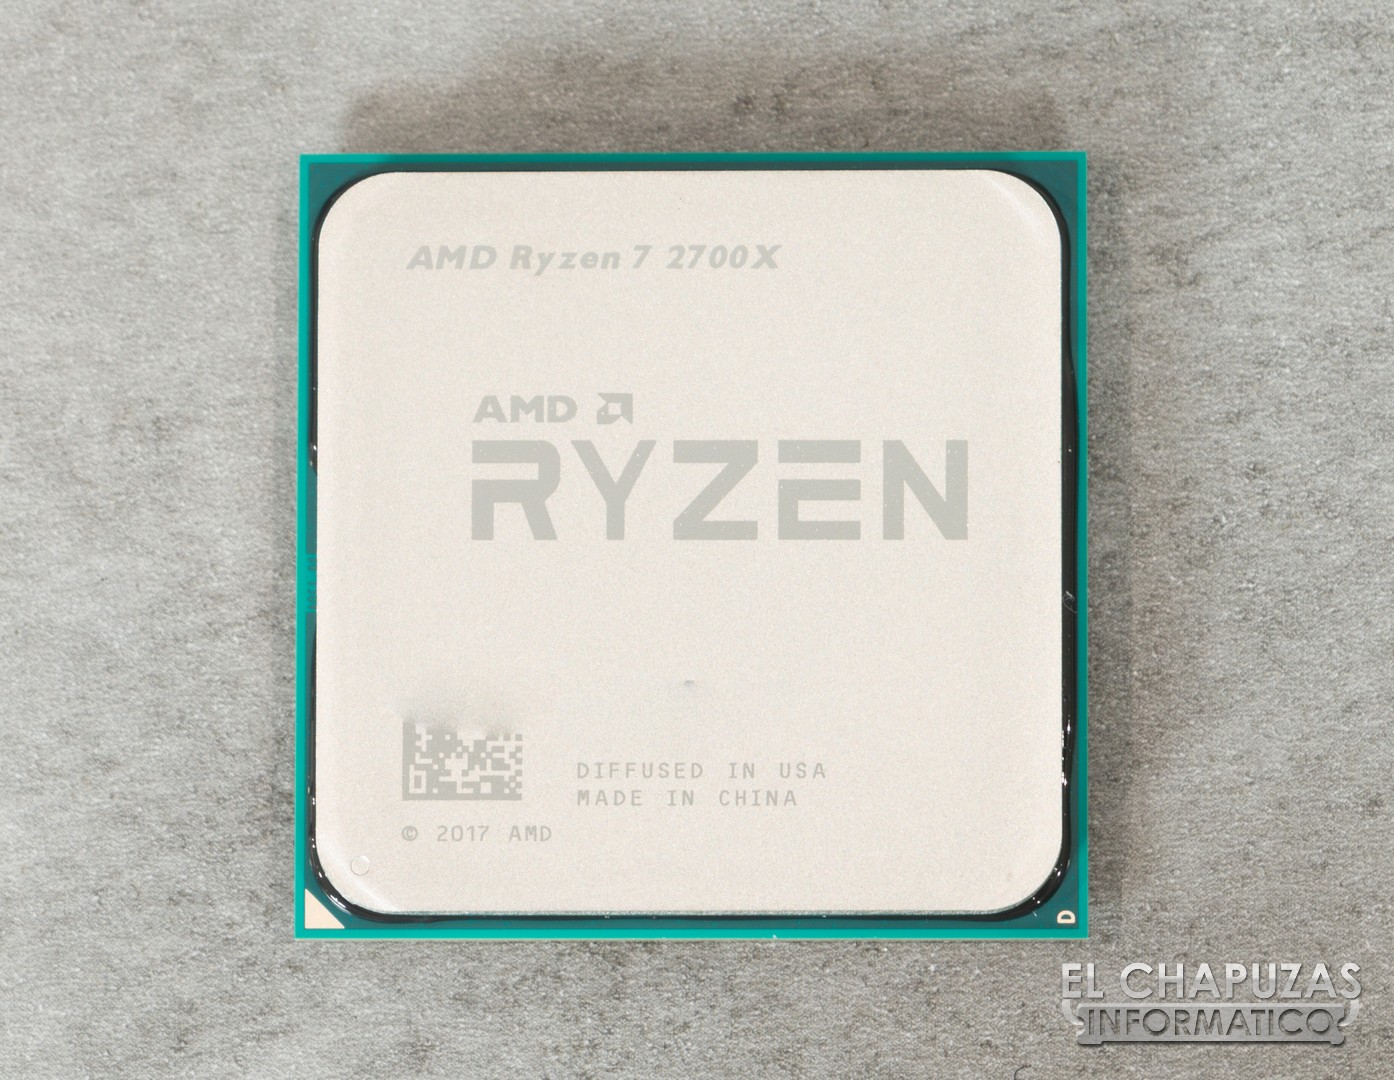 AMD Ryzen 7 2700X outpaces the Intel Core i7-8700K in more ways